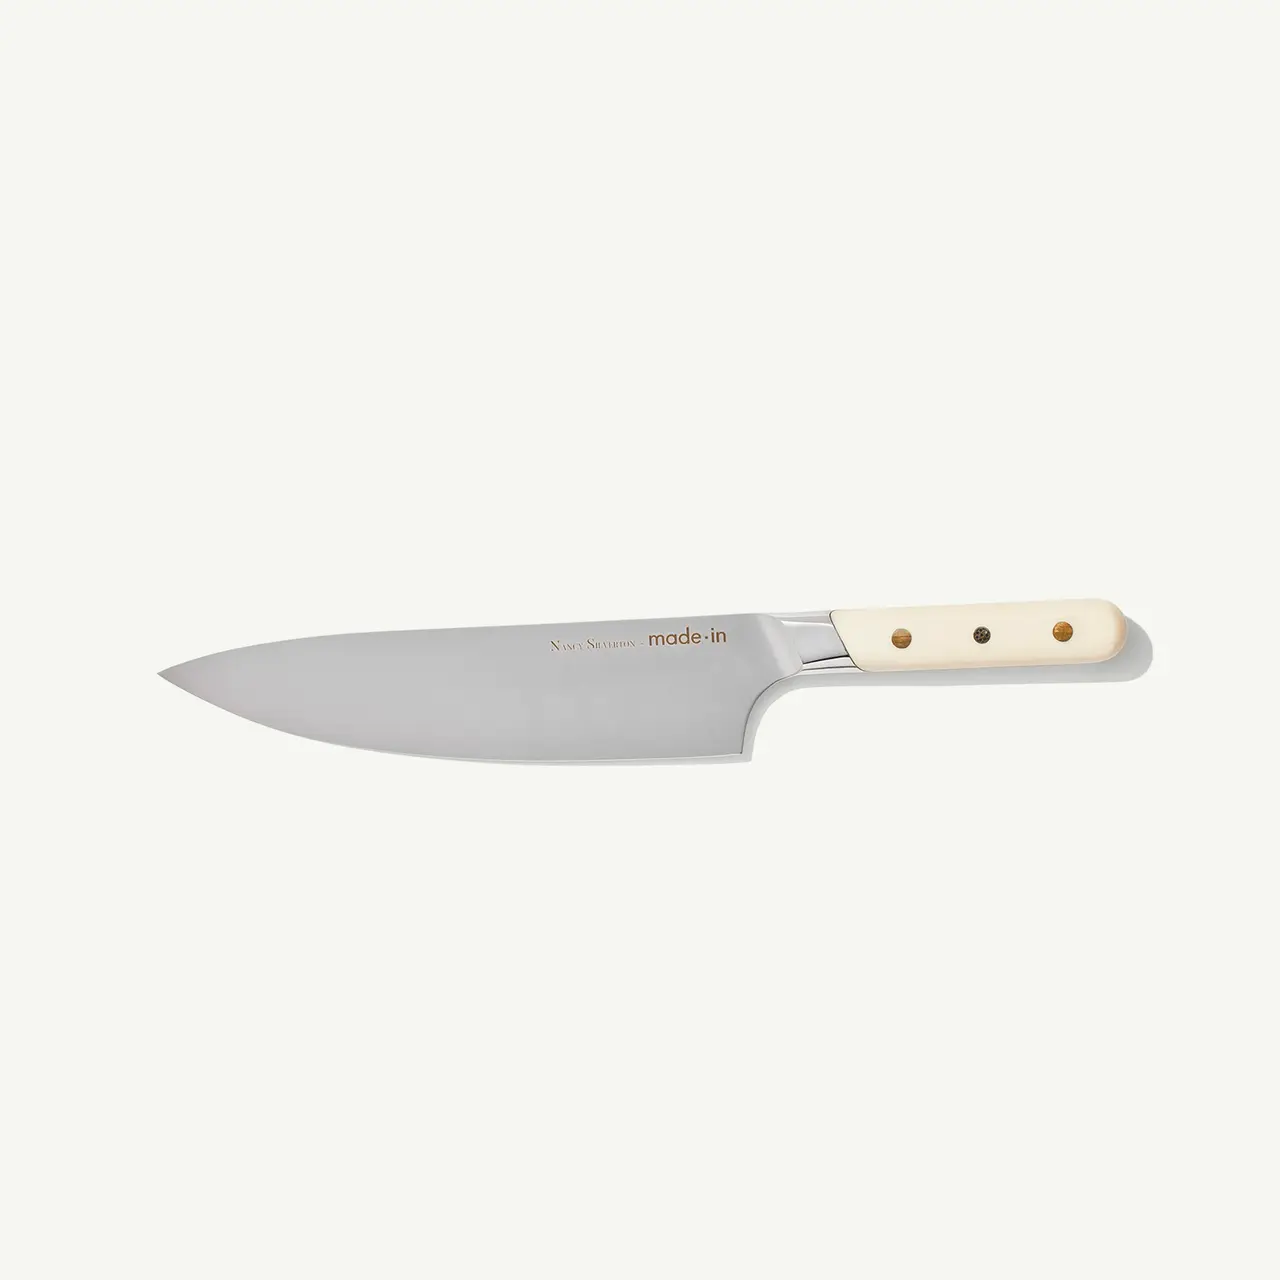 A chef's knife with a stainless steel blade and a riveted handle is shown against a plain background.